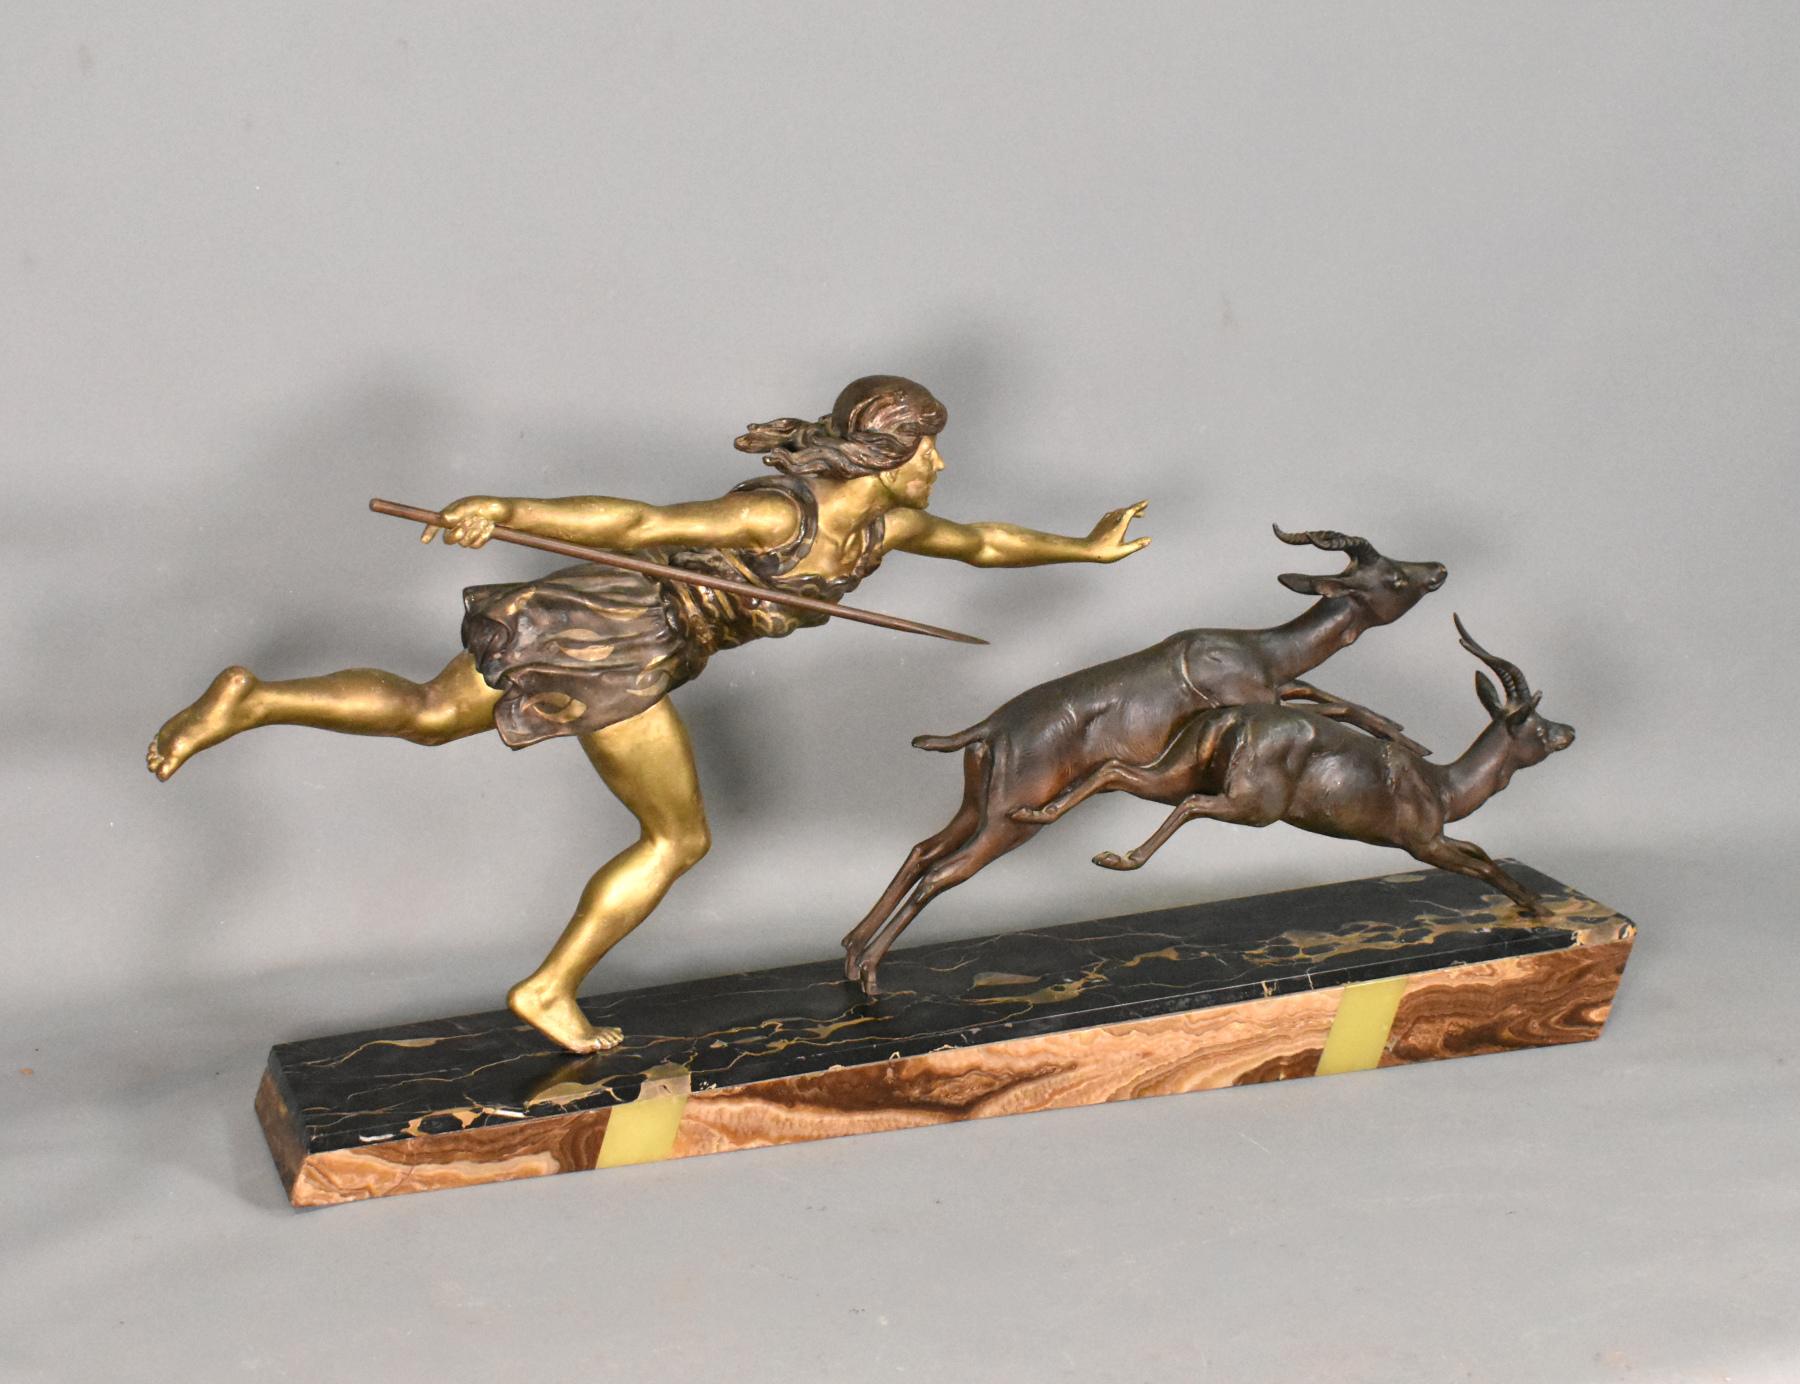 French Large Art Deco Sculpture Diana the Huntress by Carlier